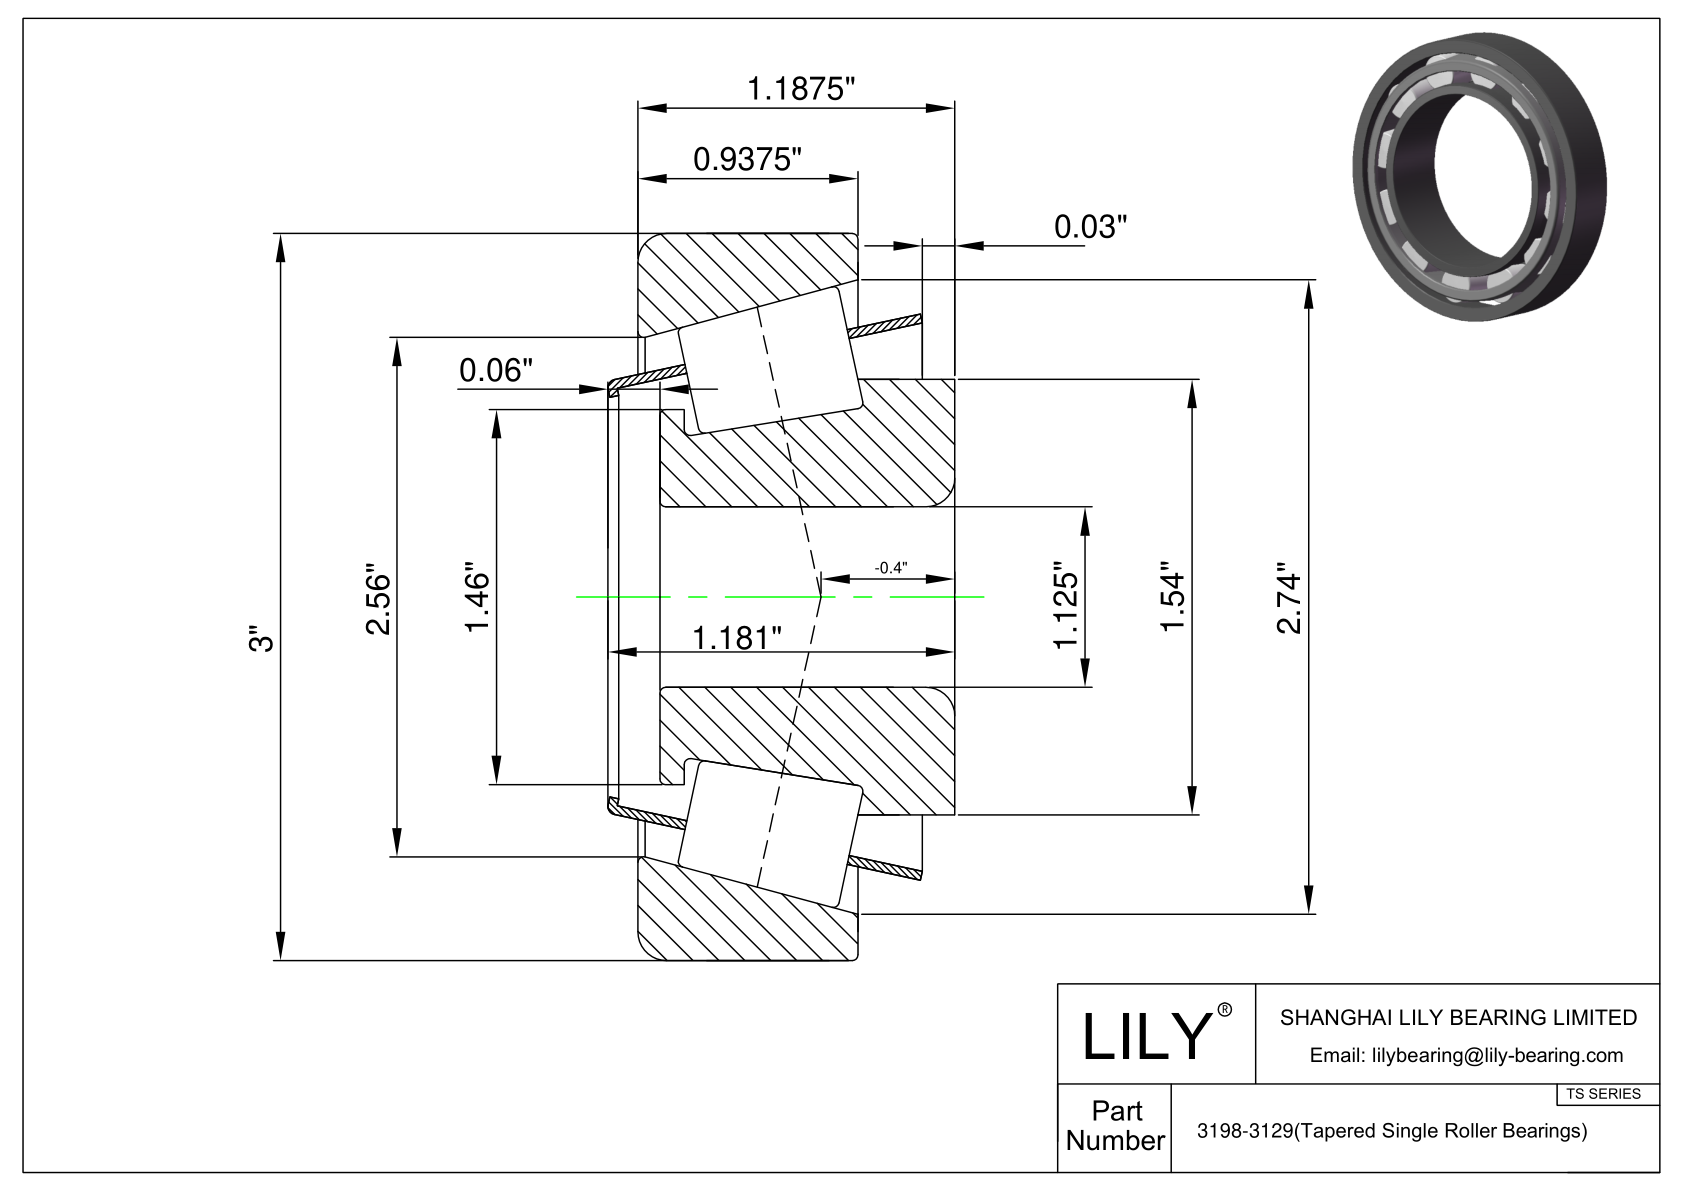 3198-3129 TS (Tapered Single Roller Bearings) (Imperial) cad drawing